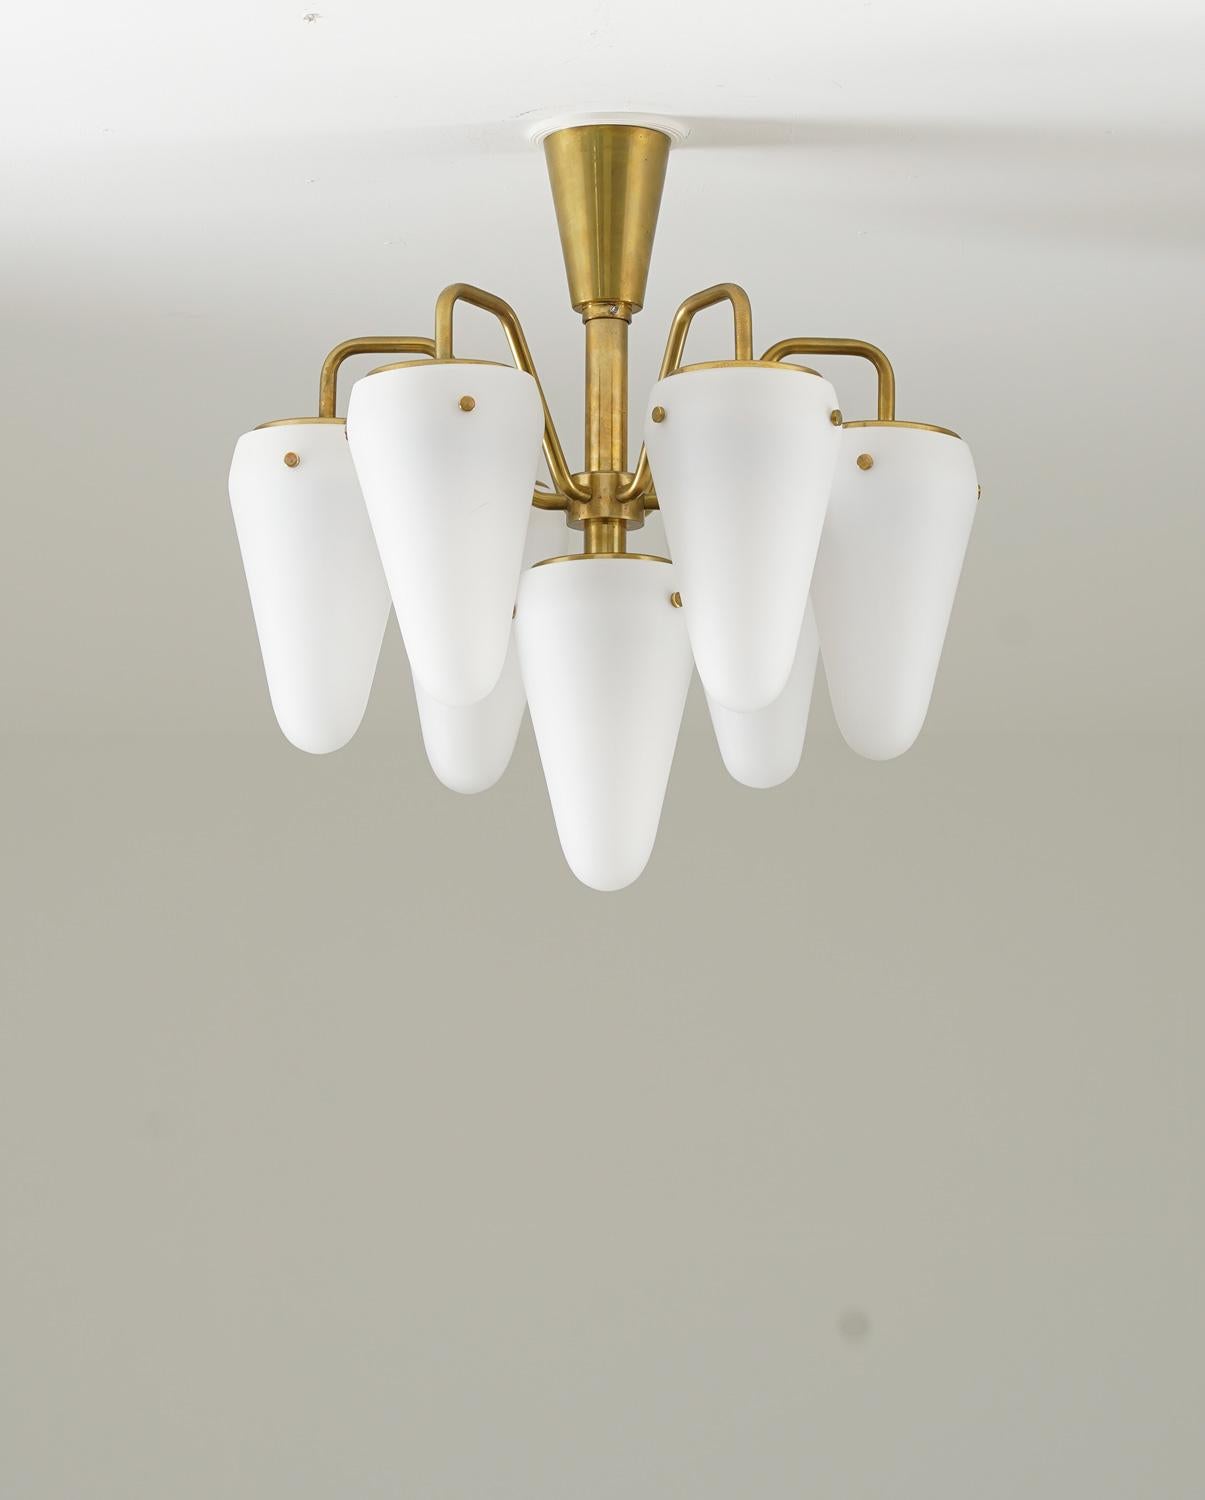 Rare midcentury chandelier in brass and frosted opaline glass, by Hans-Agne Jakobsson, 1950s. 
This early Hans-Agne Jakobsson chandelier is made with a high sense of quality and has great details. It features seven light sources, hidden by